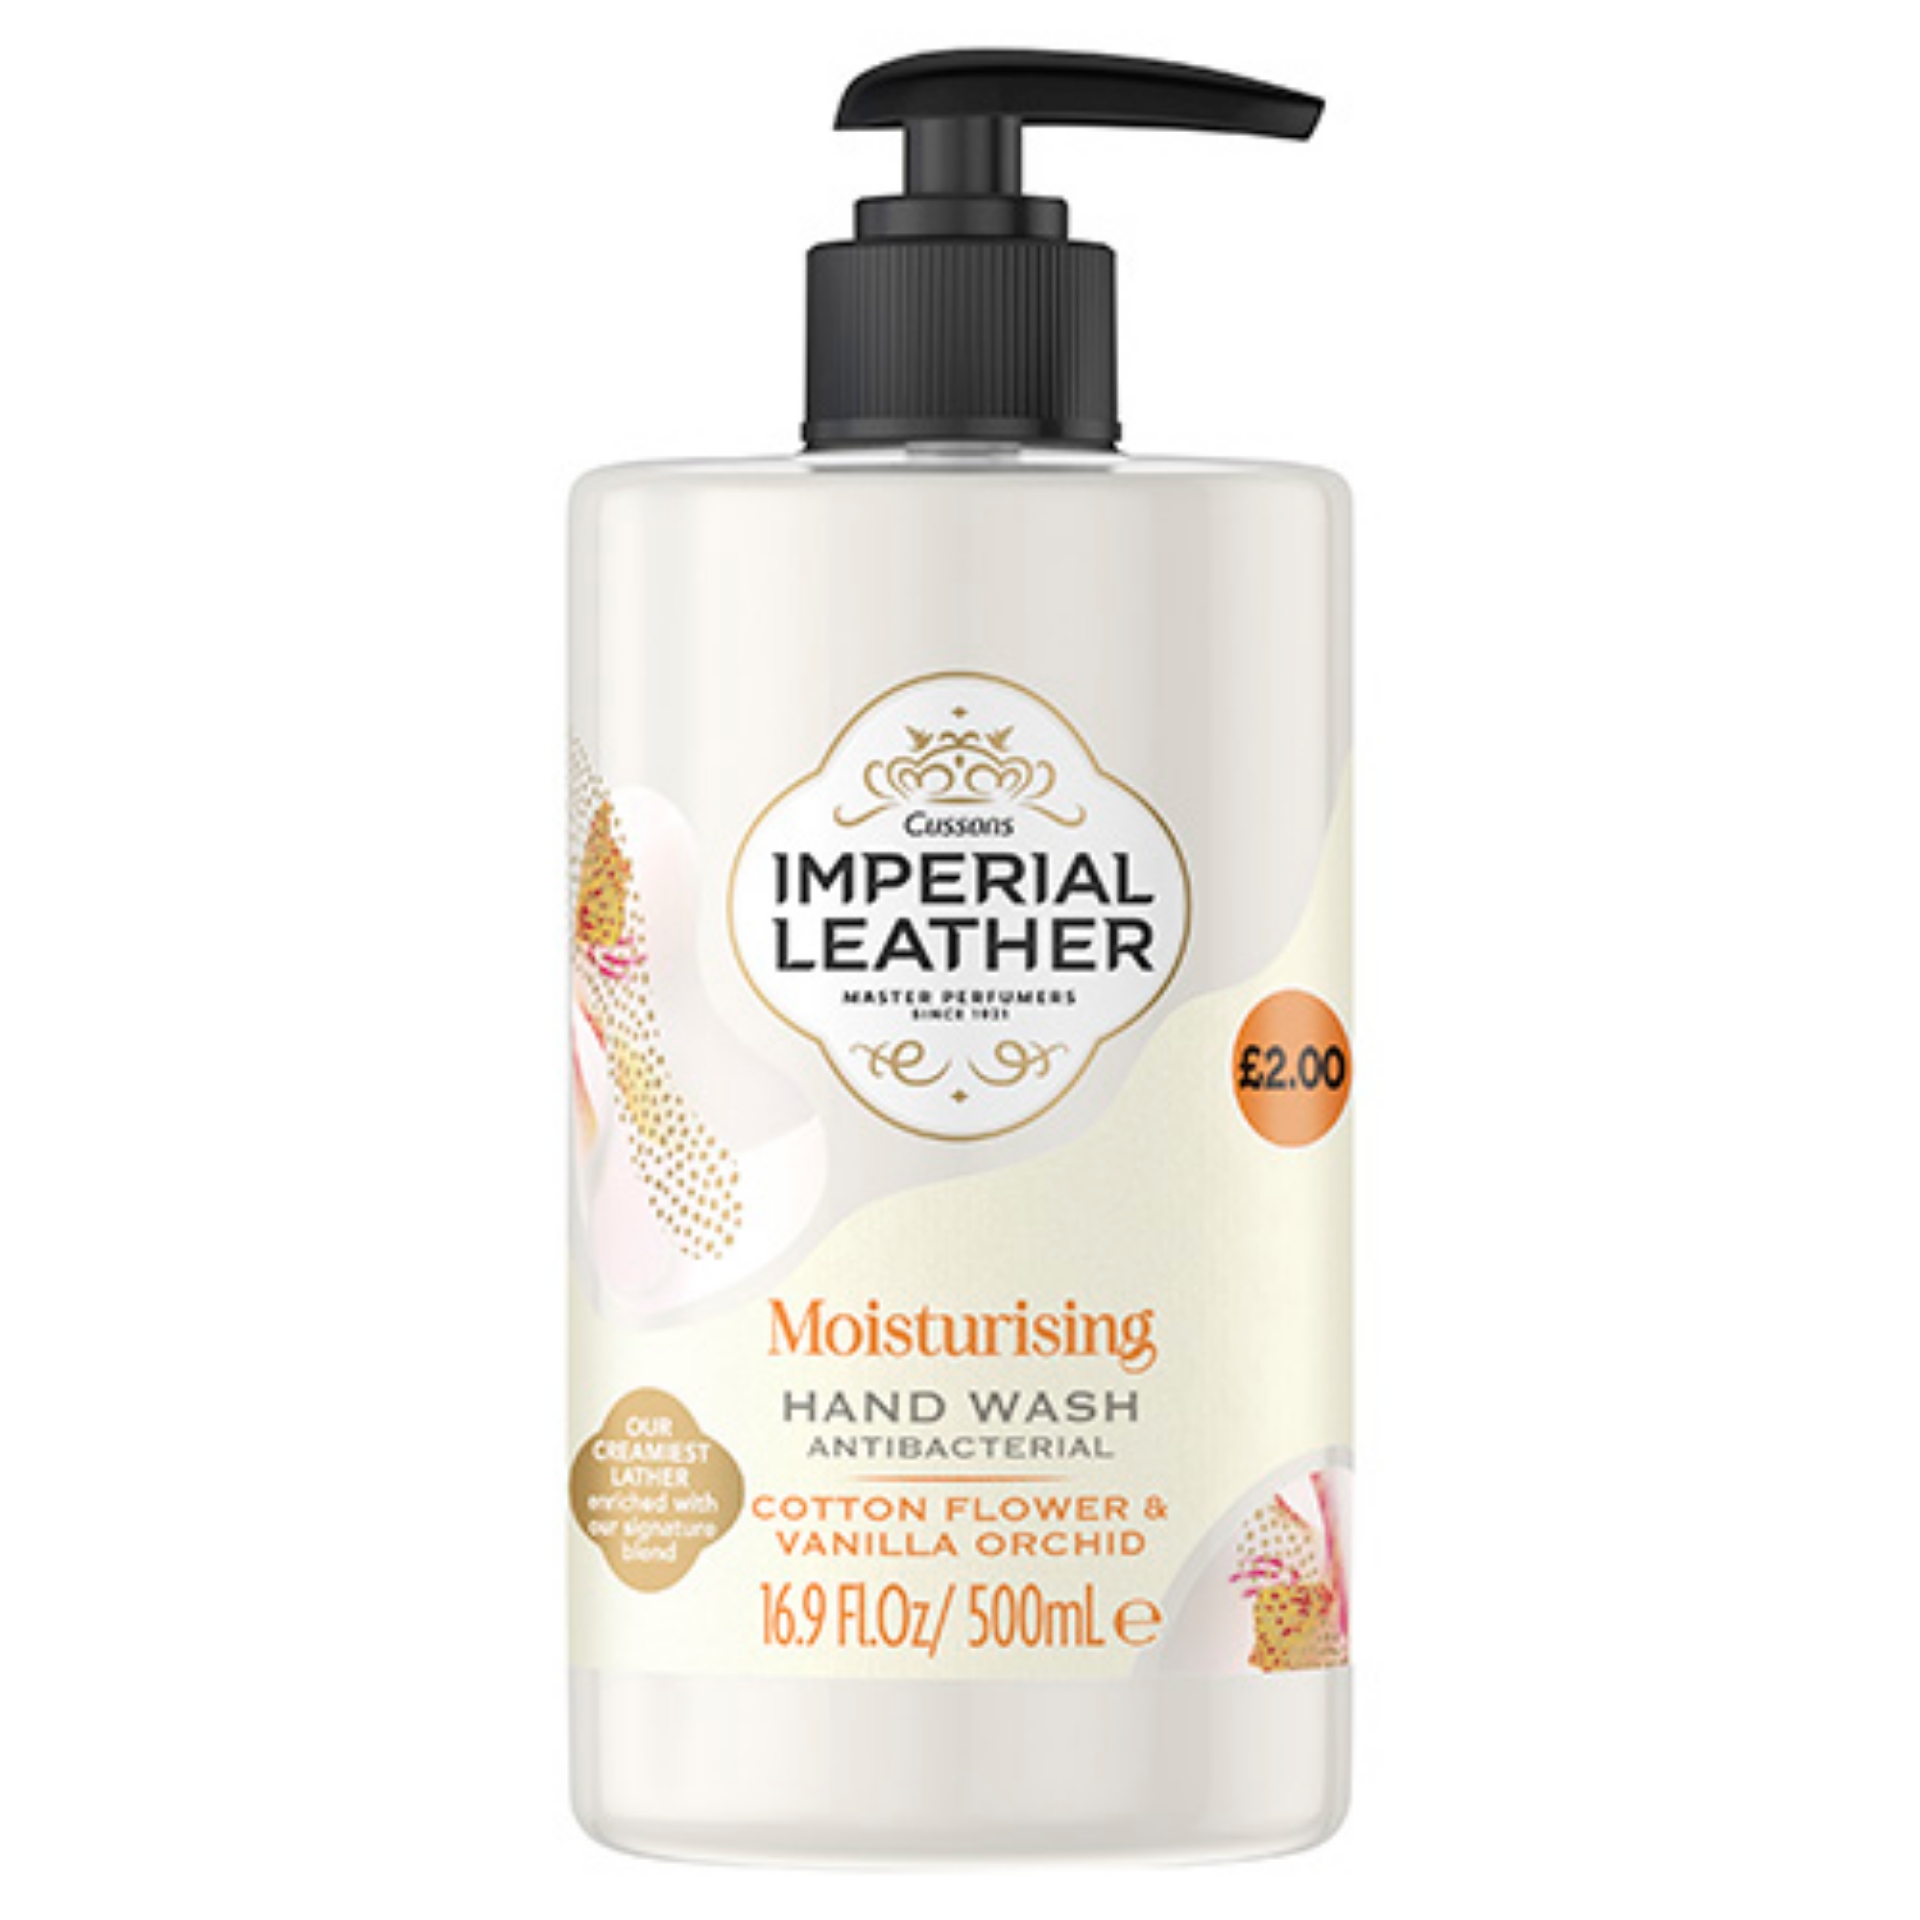 Picture of IMPERIAL LEATHER HANDWASH - MOISTURISING pm1.99